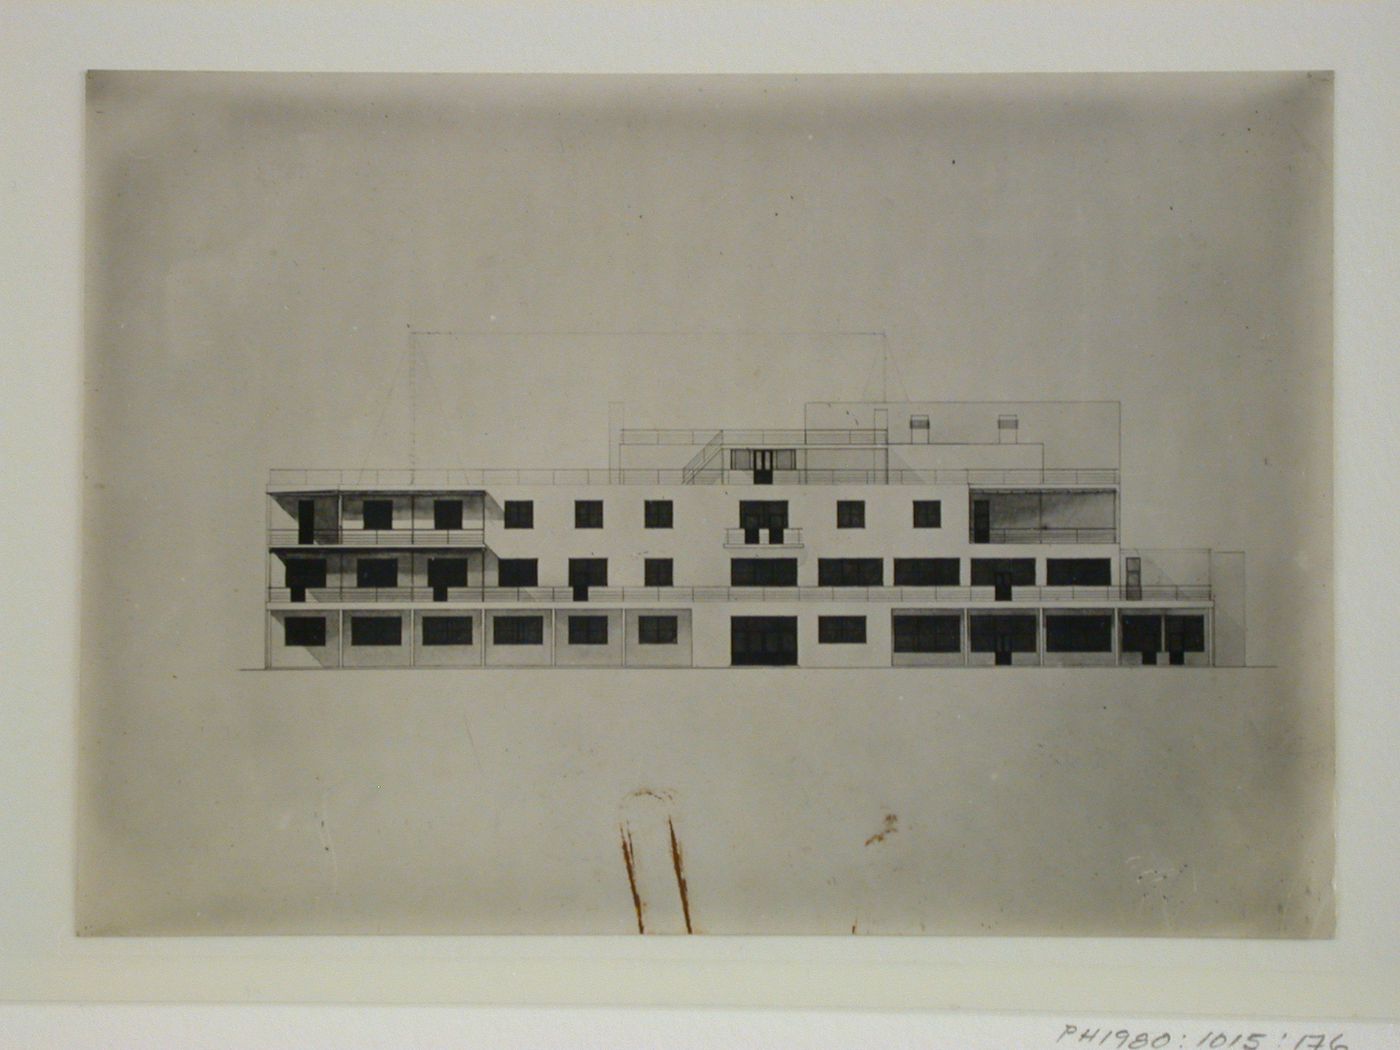 View of an elevation drawing for a club, U.S.S.R. (now Russia)